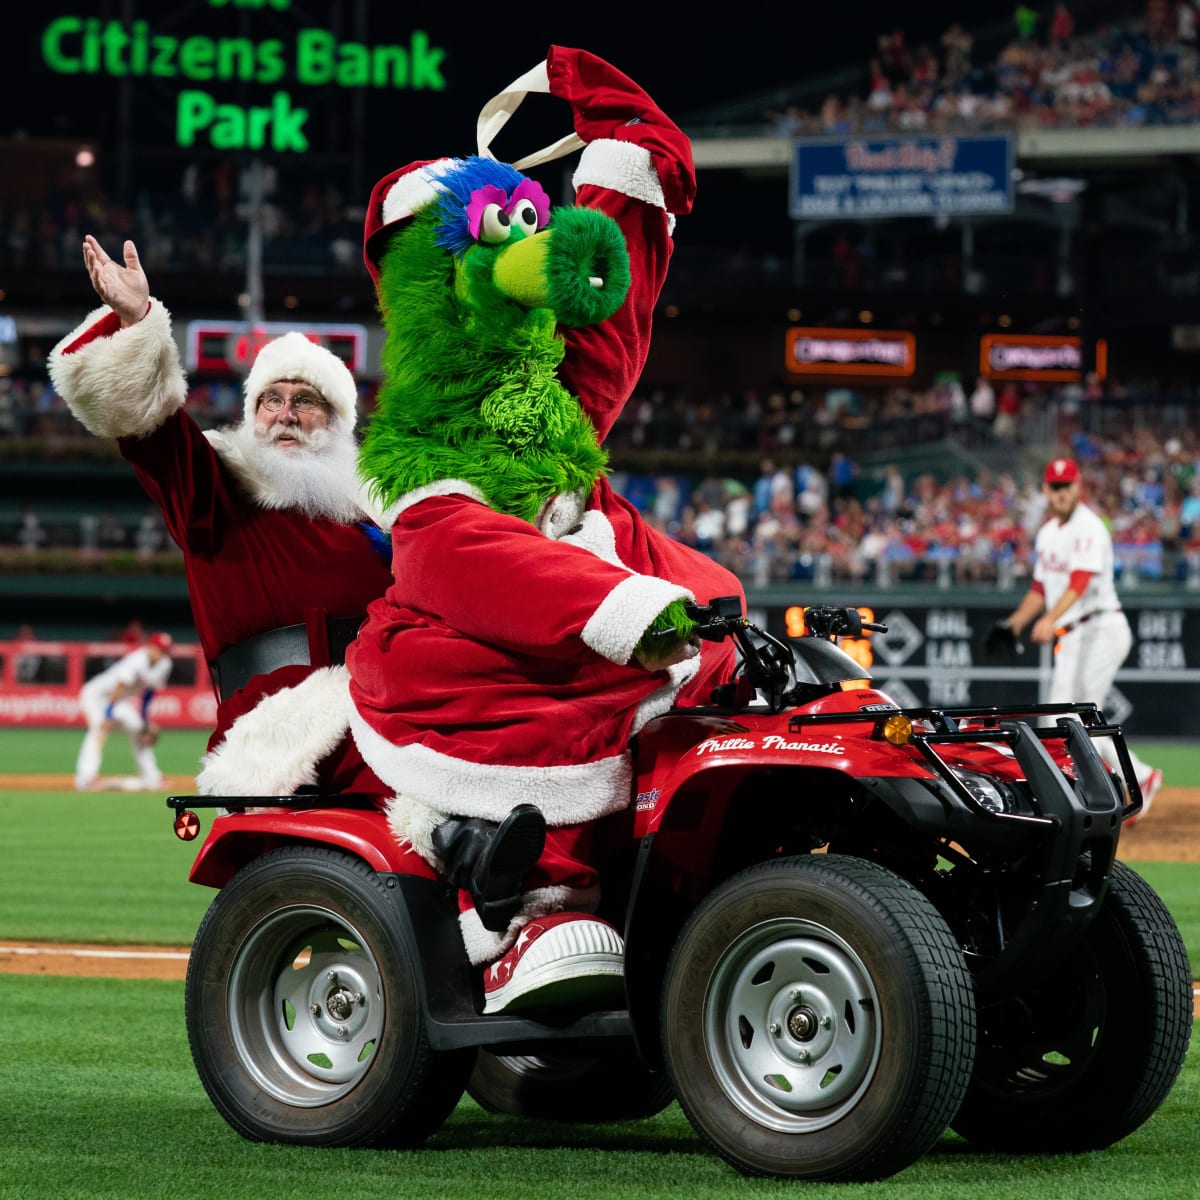 Which Phillies jersey should you buy this holiday season?  Phillies Nation  - Your source for Philadelphia Phillies news, opinion, history, rumors,  events, and other fun stuff.